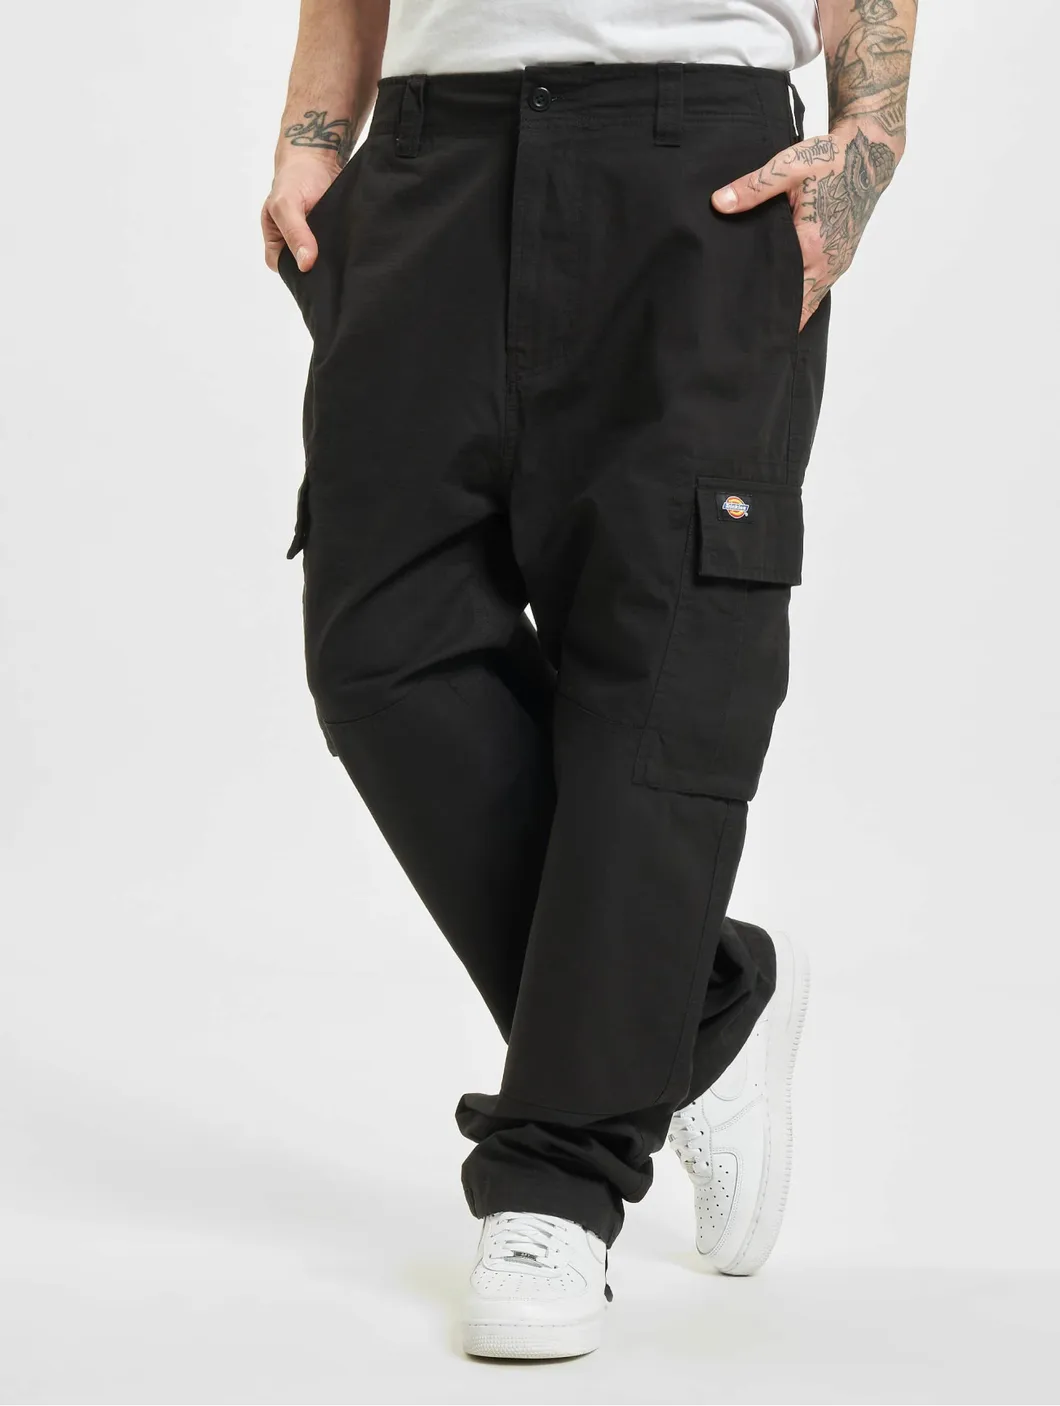 Eagle Bend Cargo Trousers in Black, Trousers